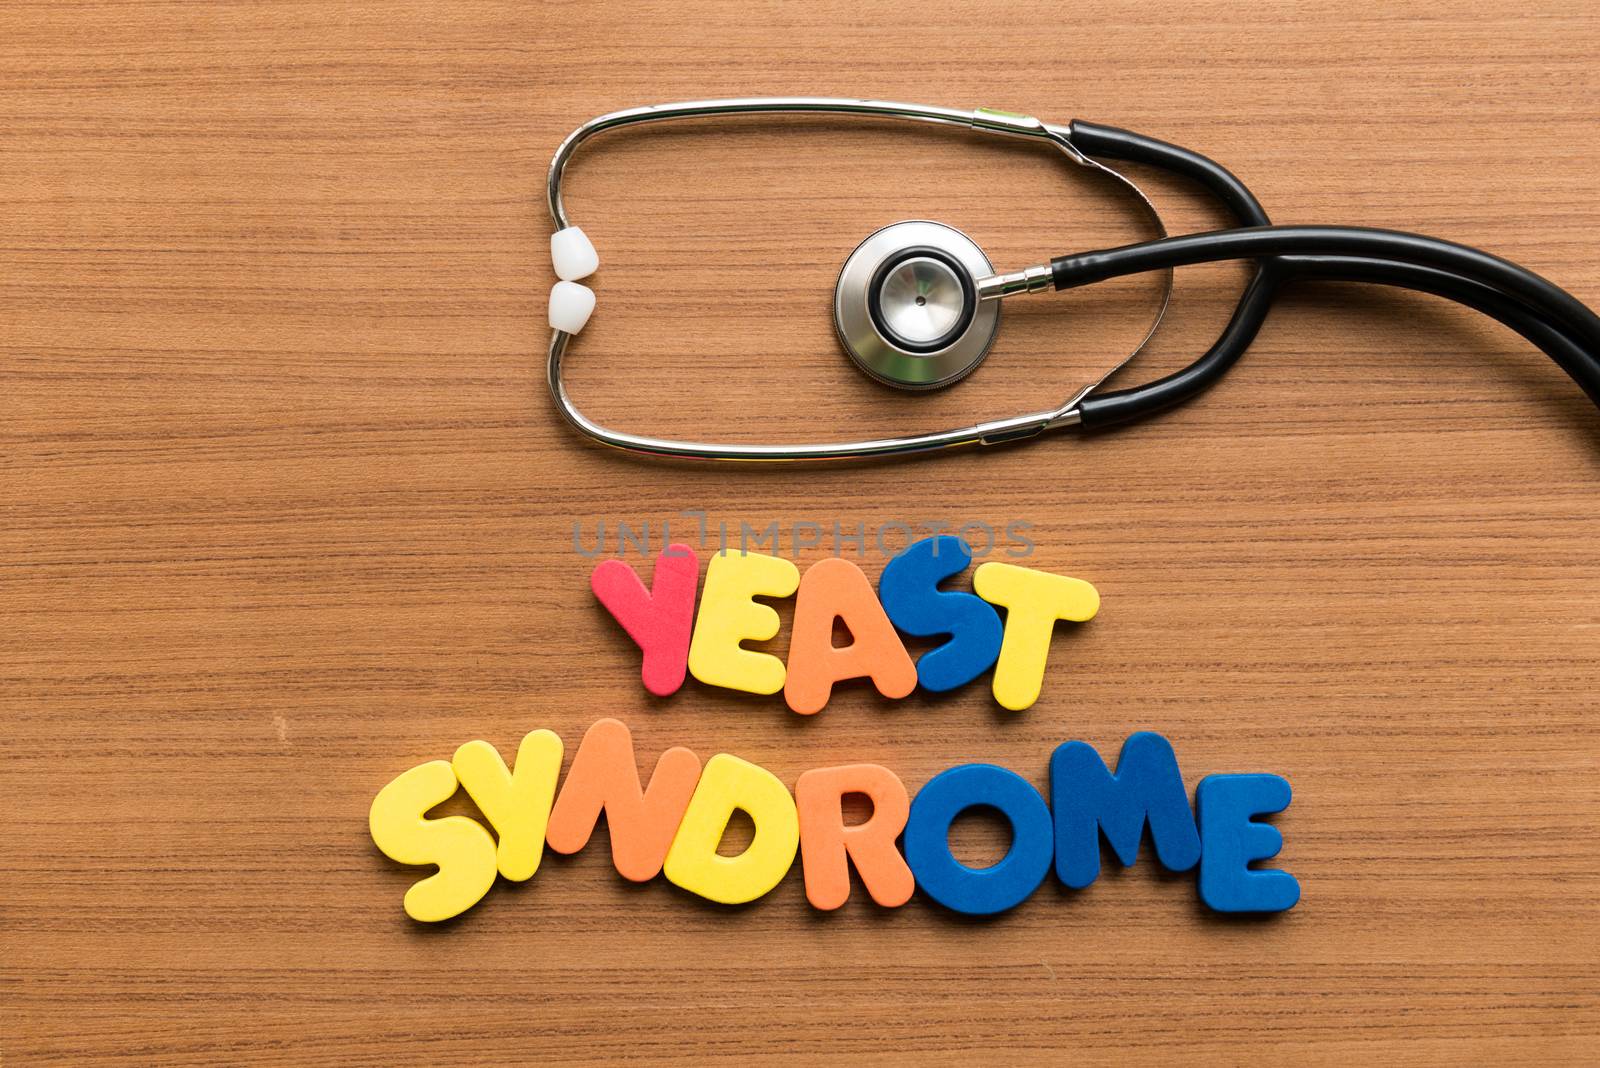 yeast syndrome colorful word with stethoscope on wooden background